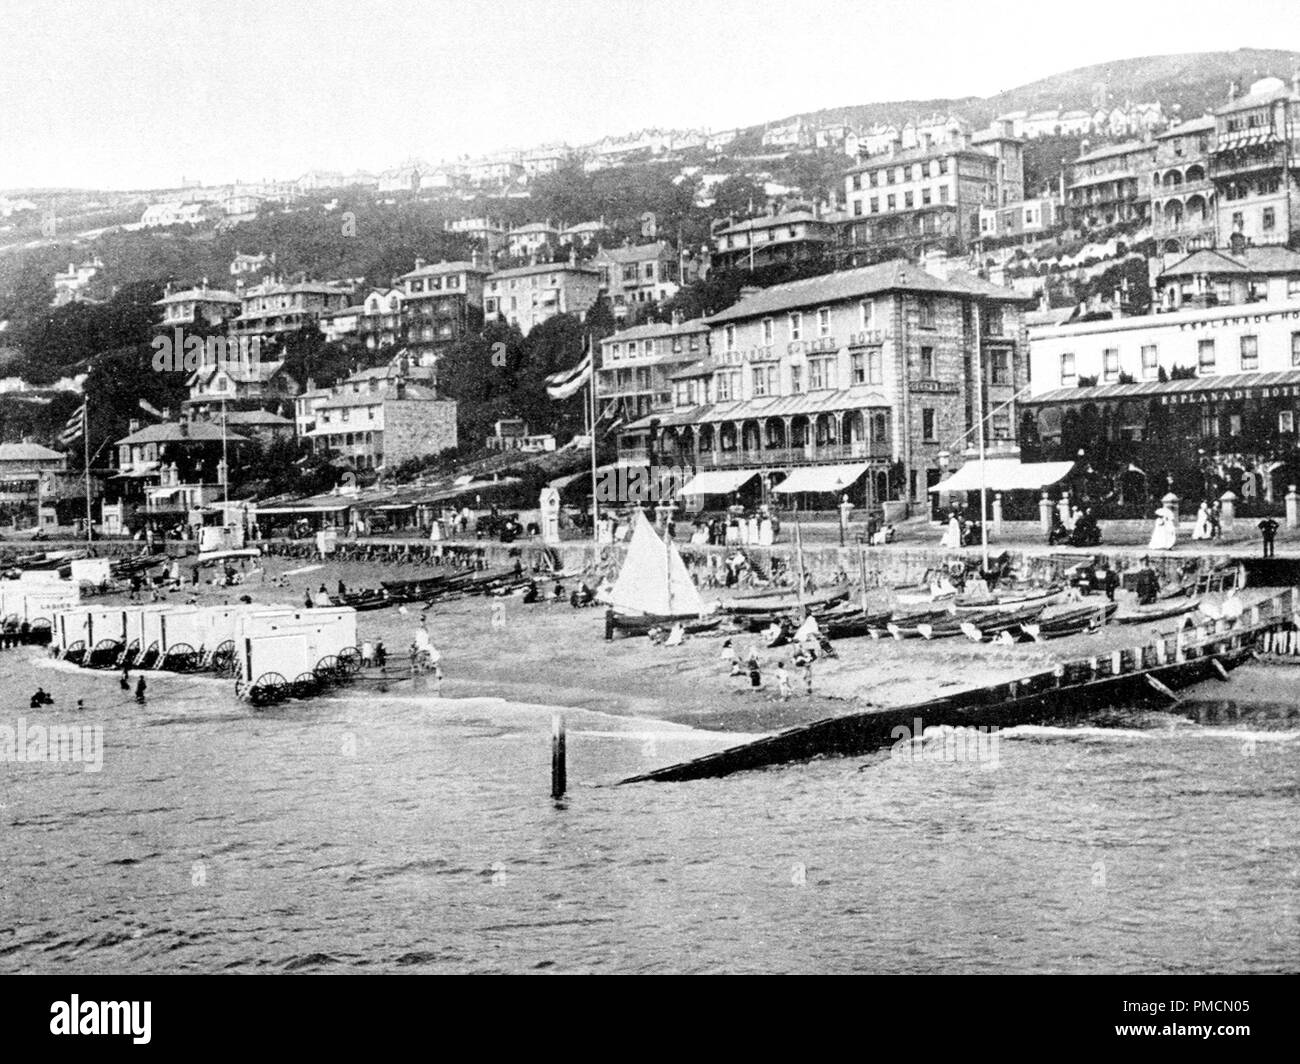 Ventnor, Isle of Wight, early 1900s Stock Photo - Alamy